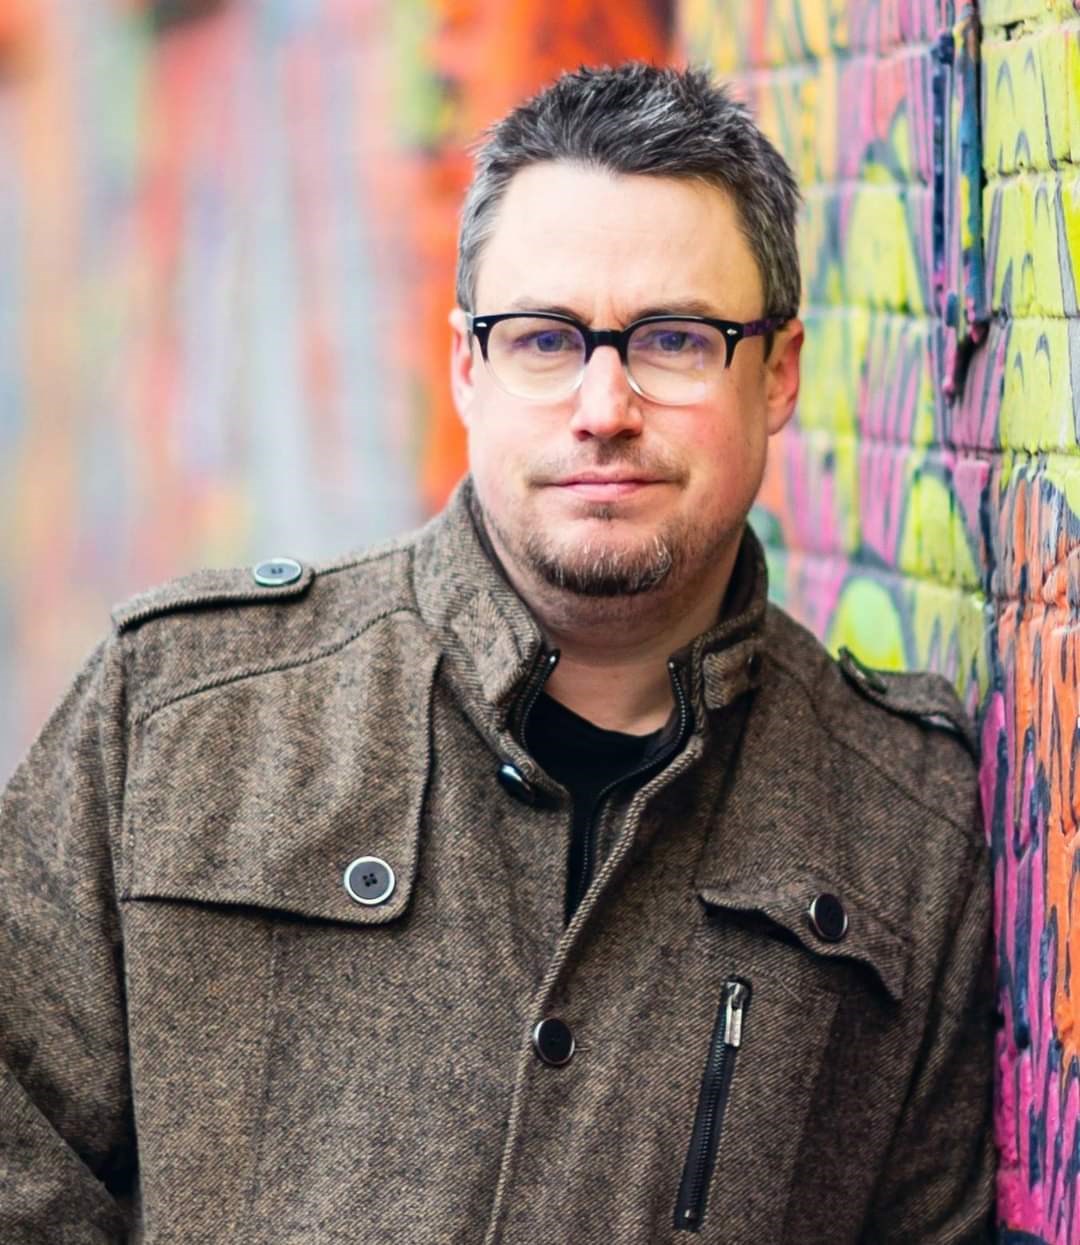 Ryan Cowley wearing glasses and a coat leaning against a multicolored/graffitied brick wall.